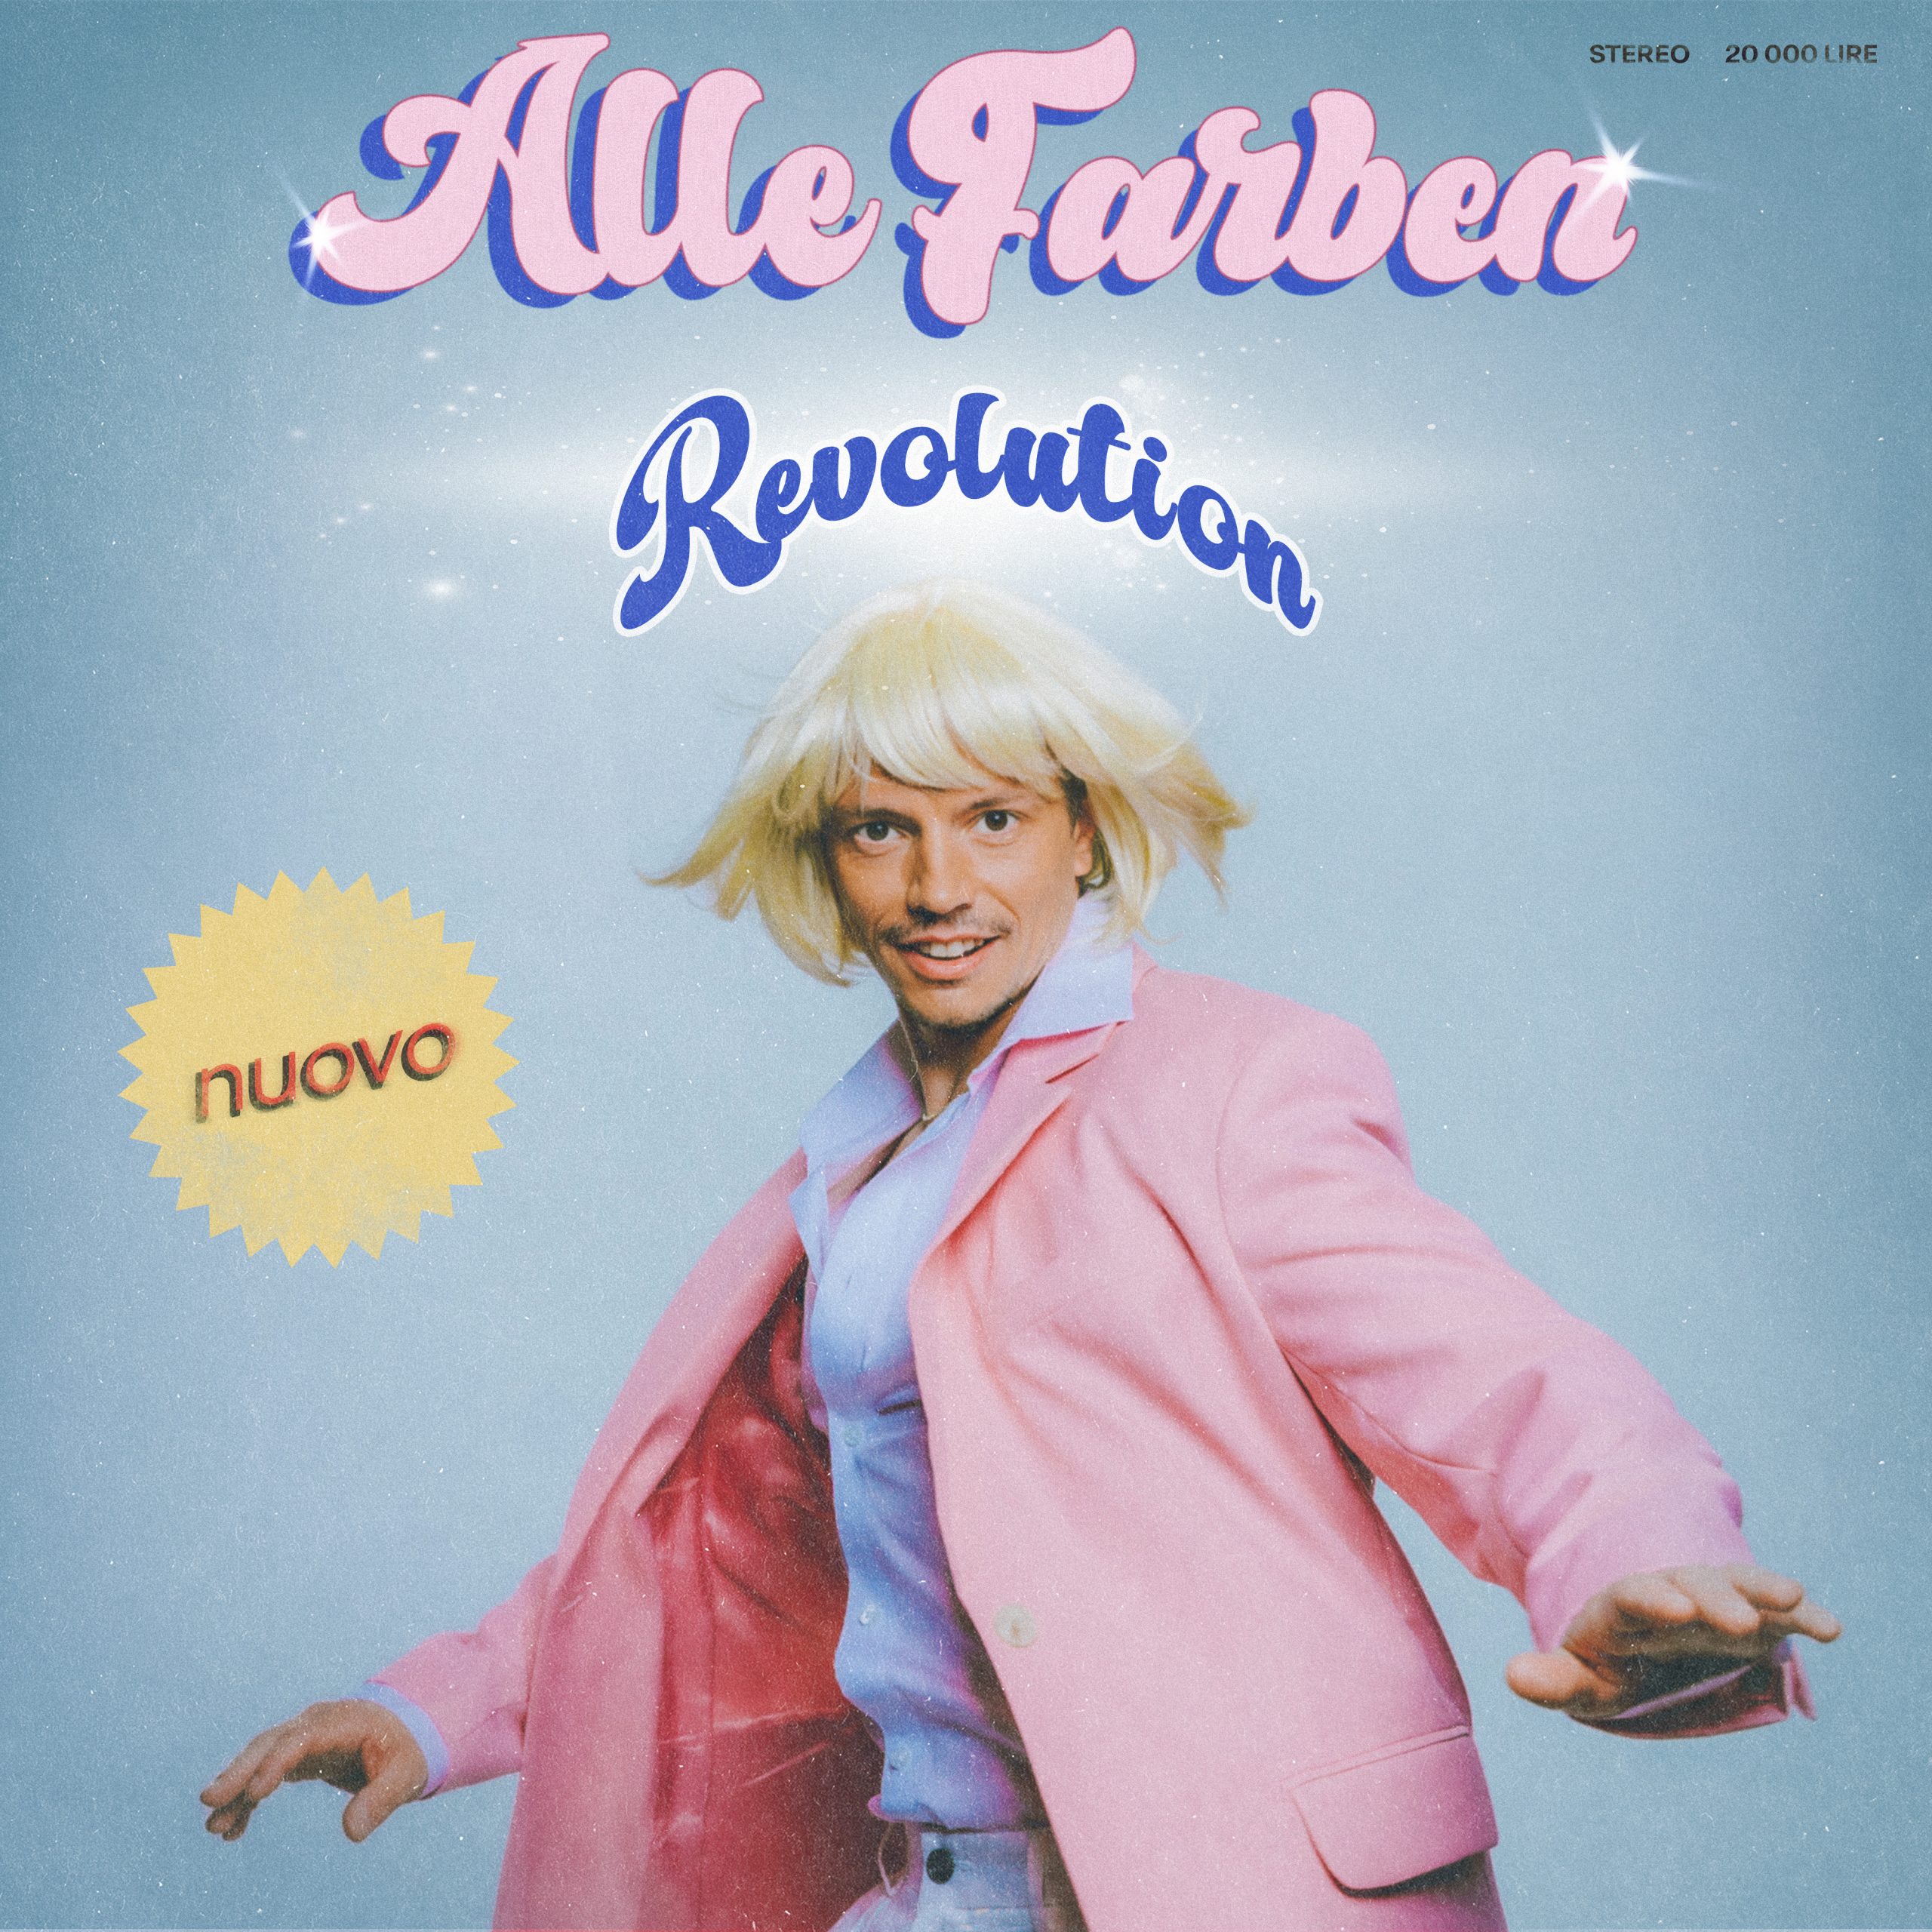 You are currently viewing SuperNova: Alle Farben – Revolution (14.06)